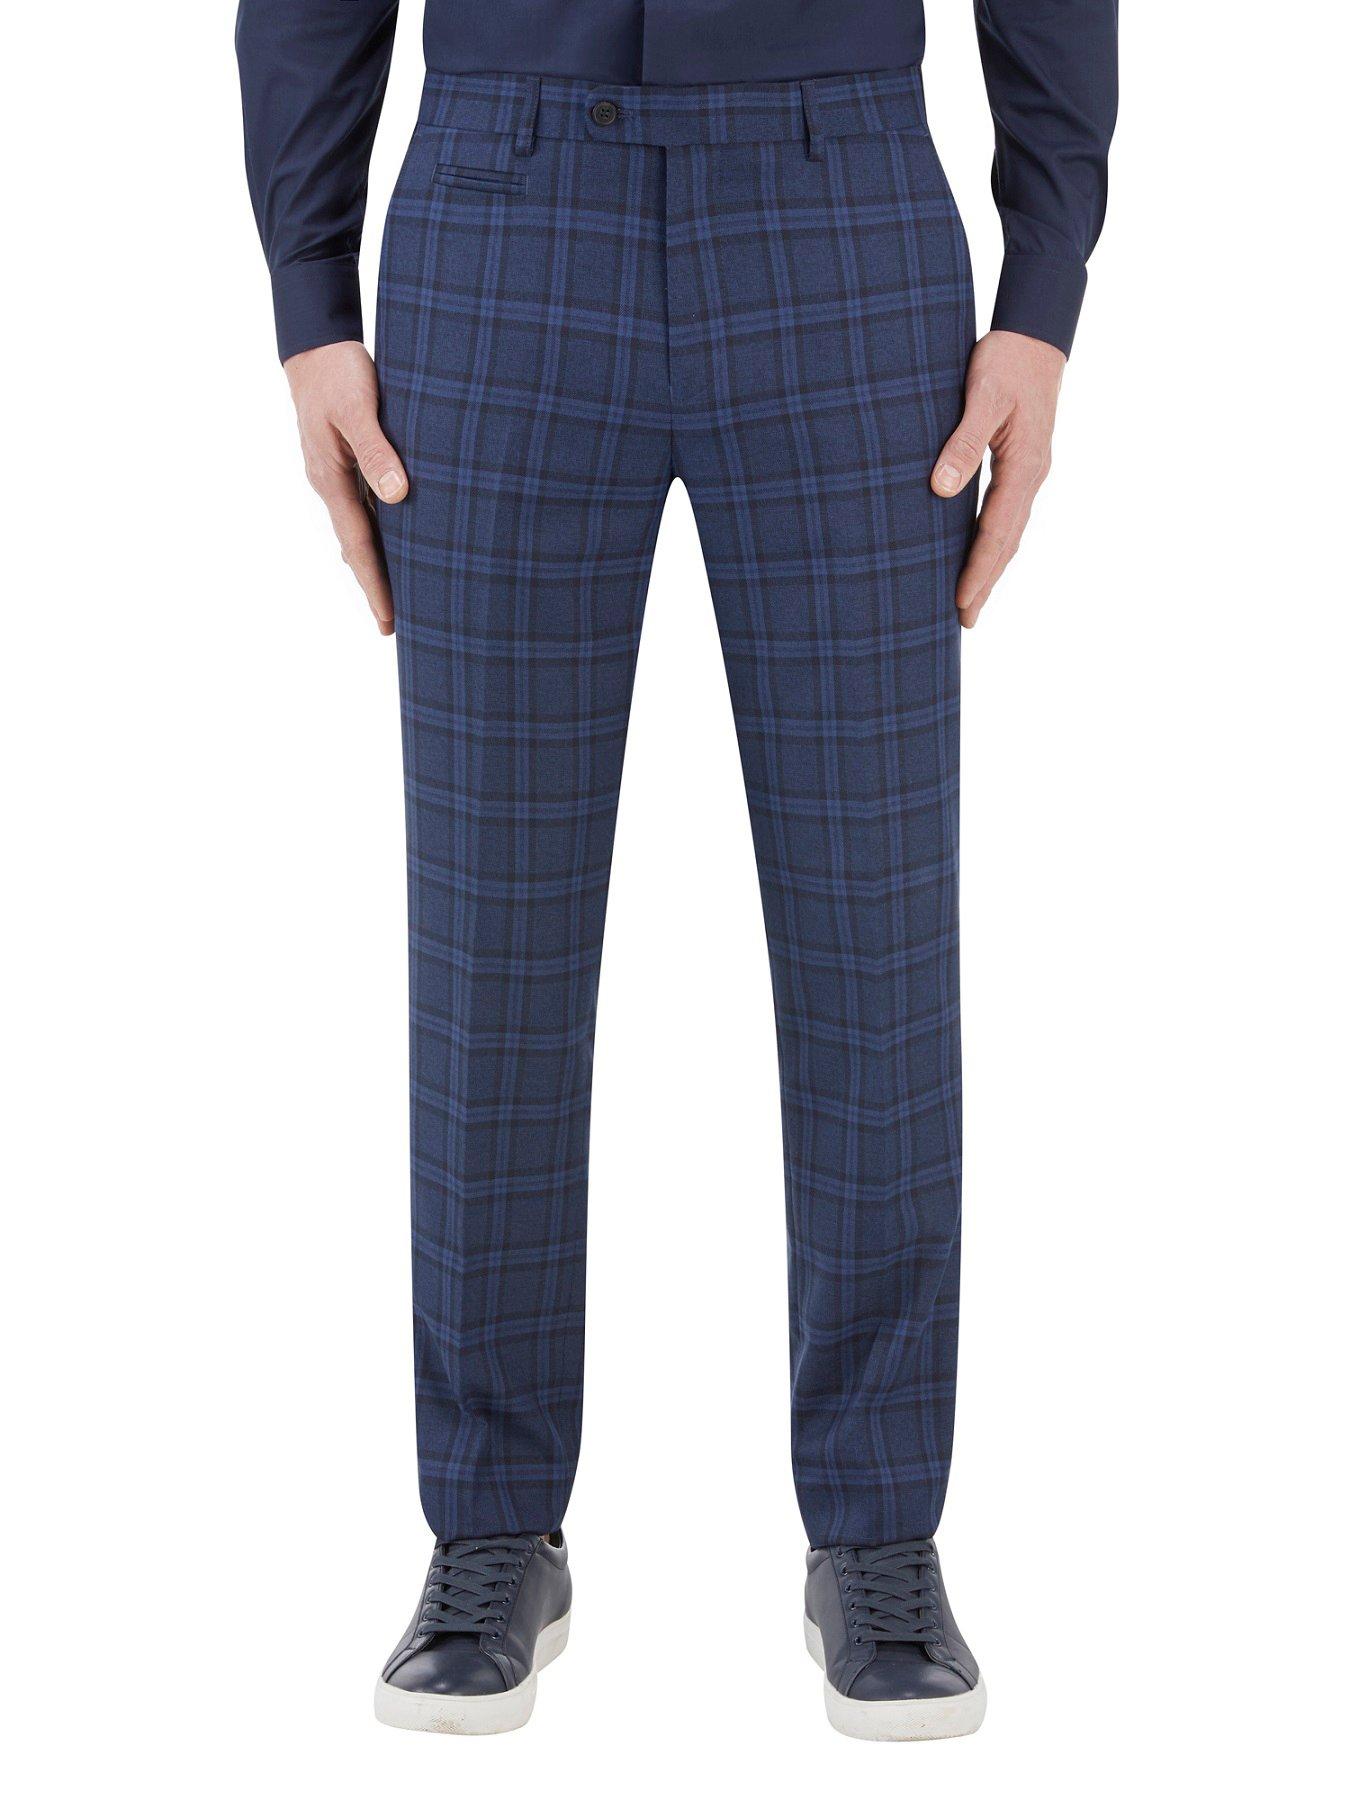 Men Angus Slim Fit Bold Check lyfcycle Trouser - Navy Check